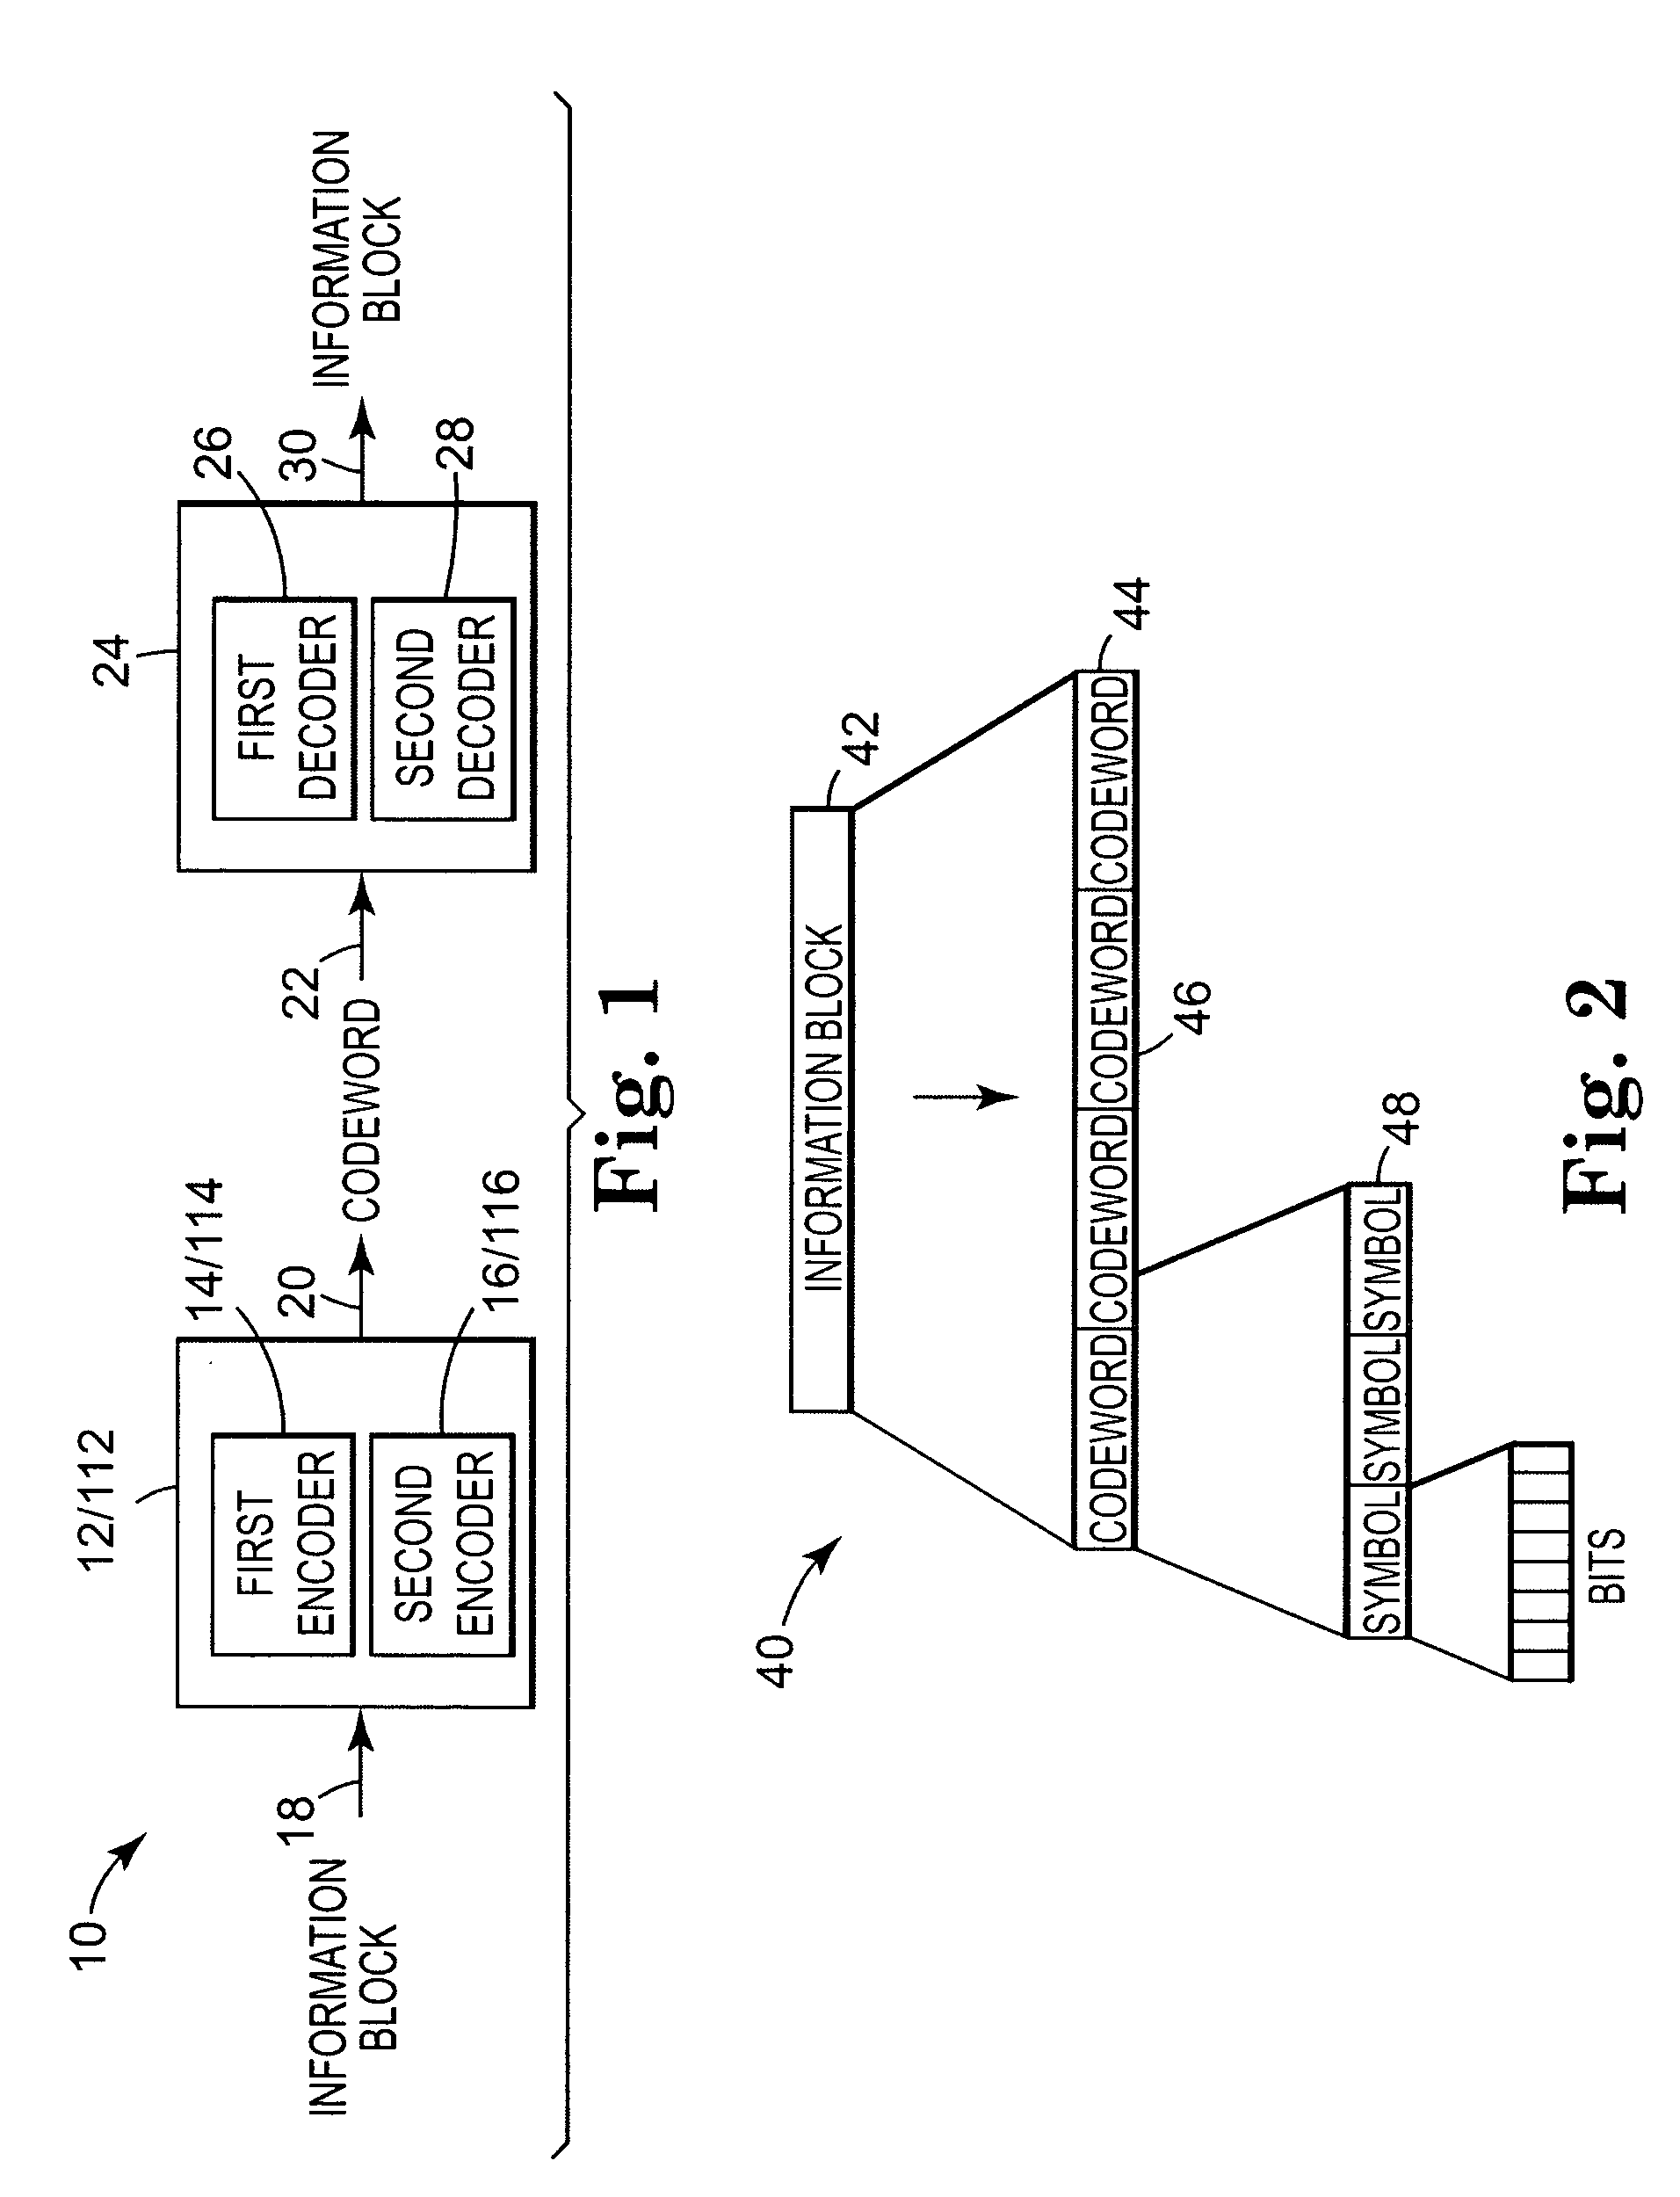 System for error correction coding and decoding